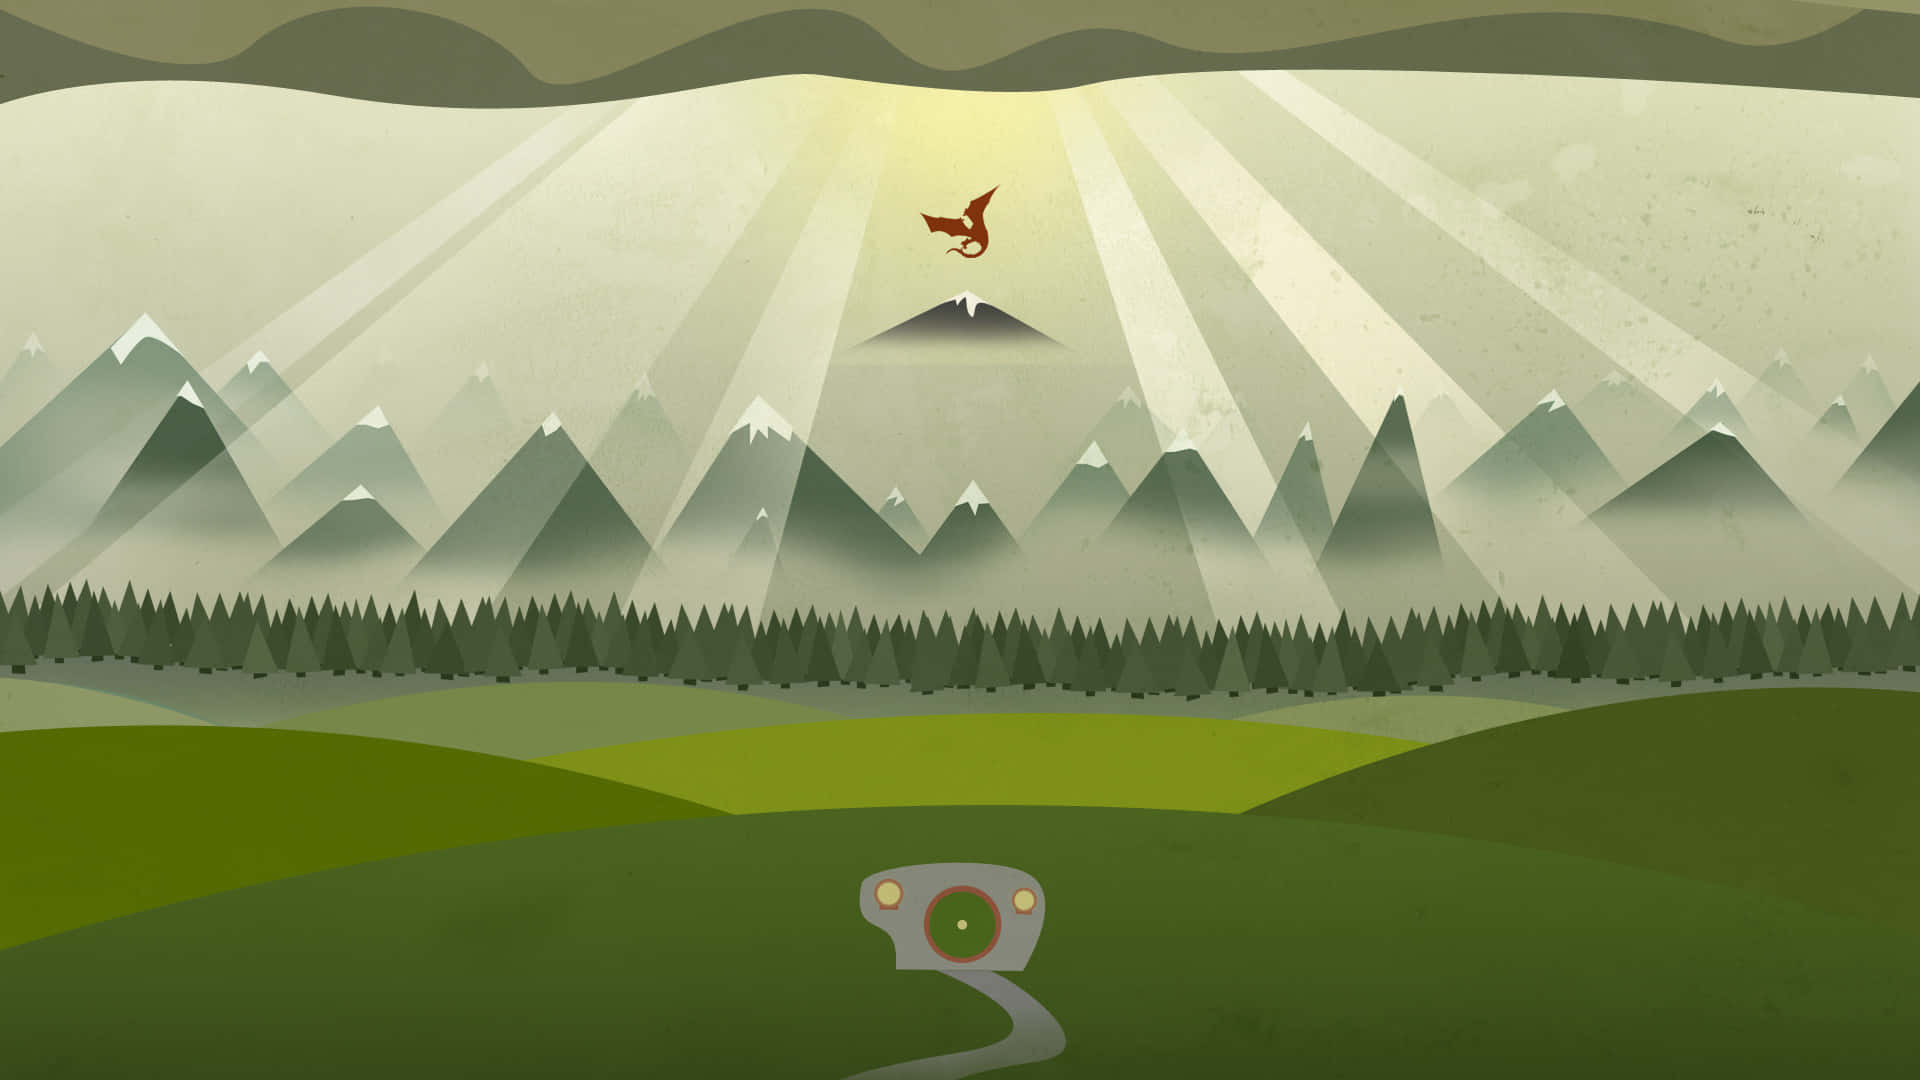 Misty Mountains And Dragon Illustration Wallpaper